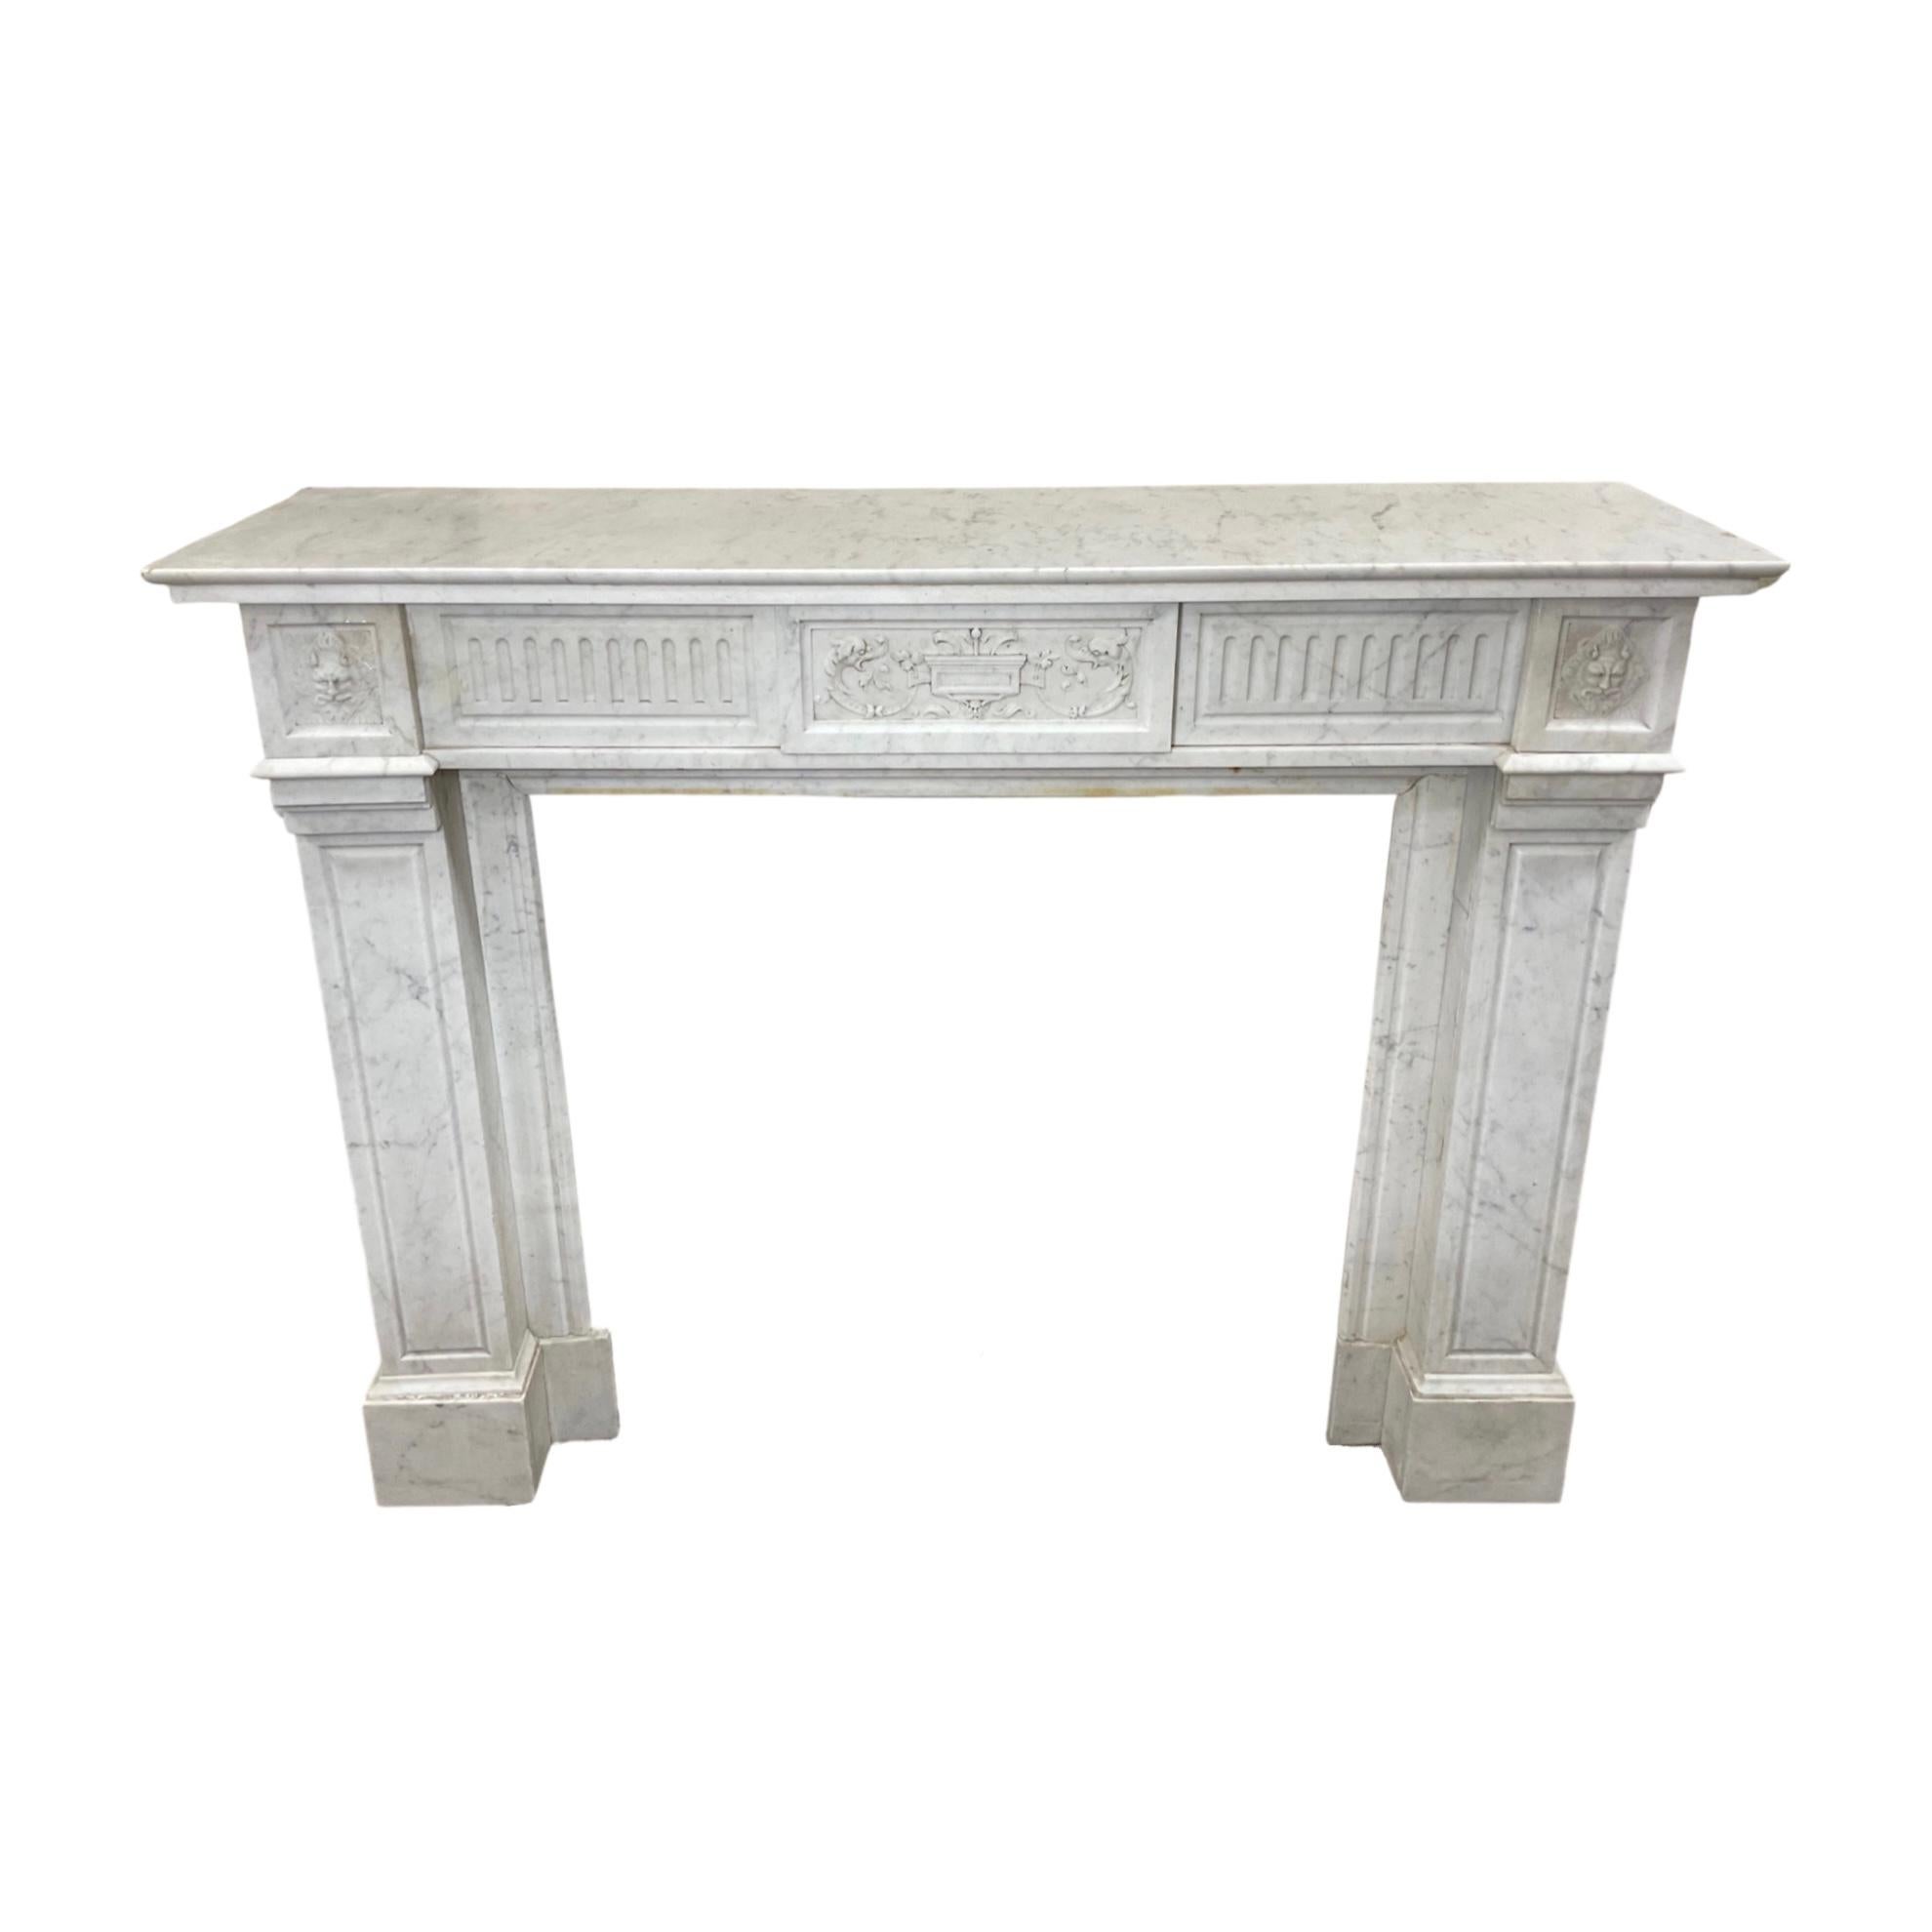 French Carrara Marble Mantel In Good Condition For Sale In Dallas, TX